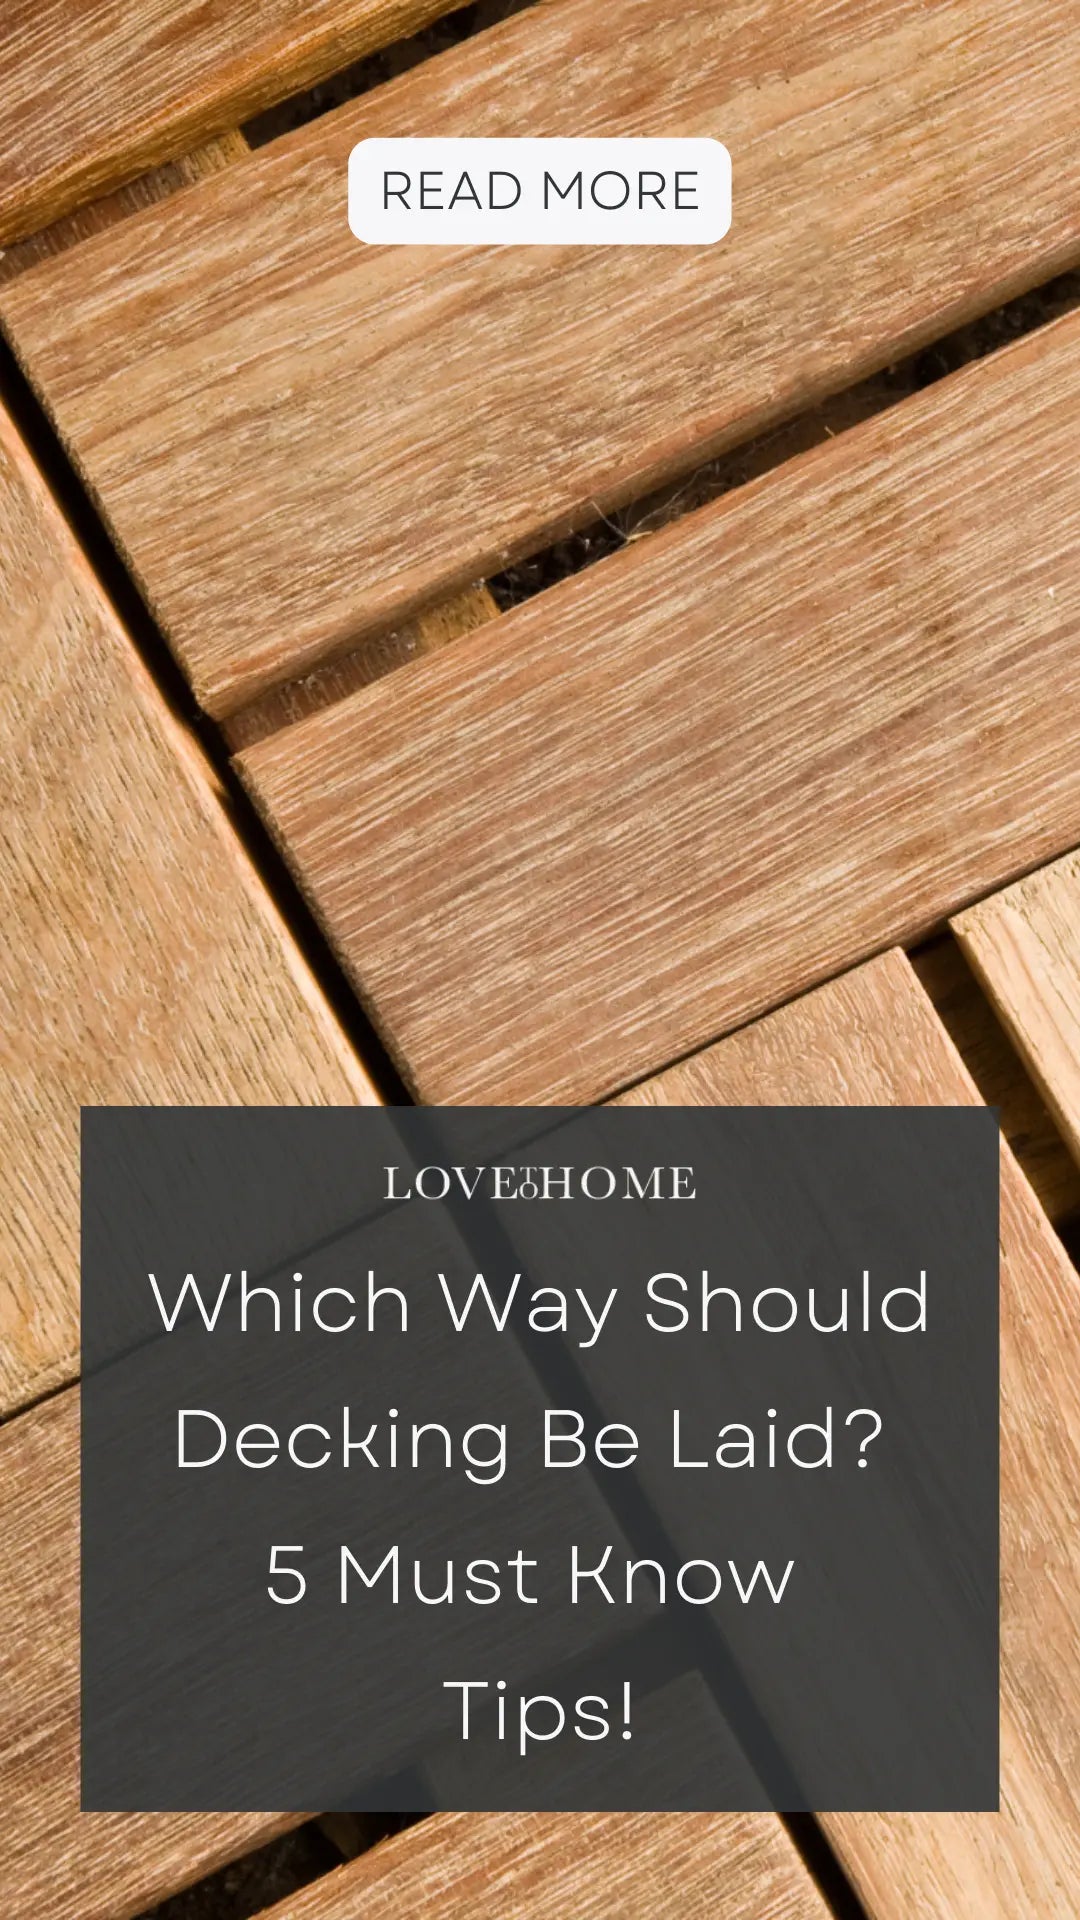 Which Way Should Decking Be Laid? 5 Must Know Tips!